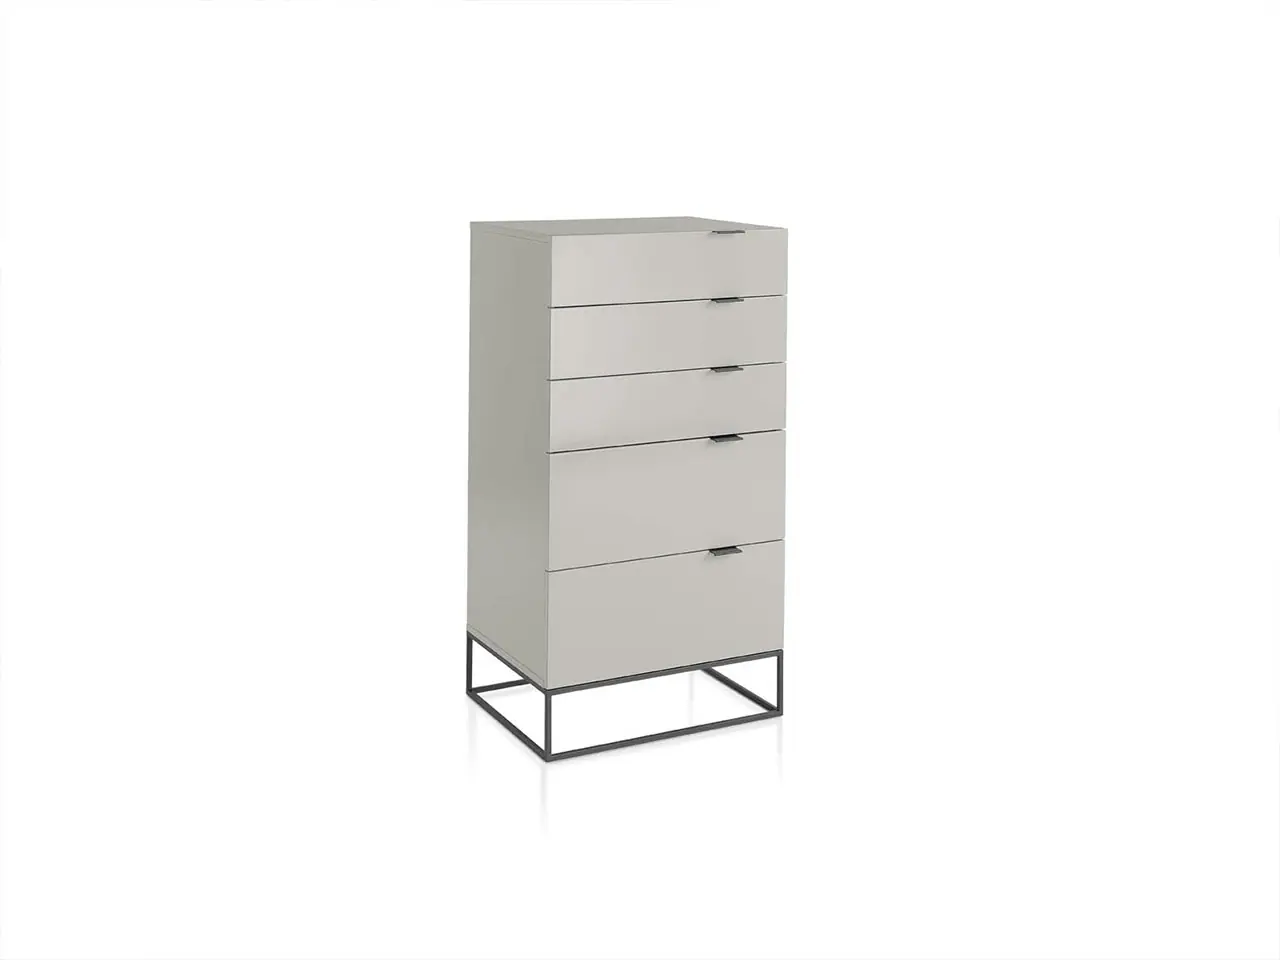 57133-57131-7019-7020-chest-of-drawers